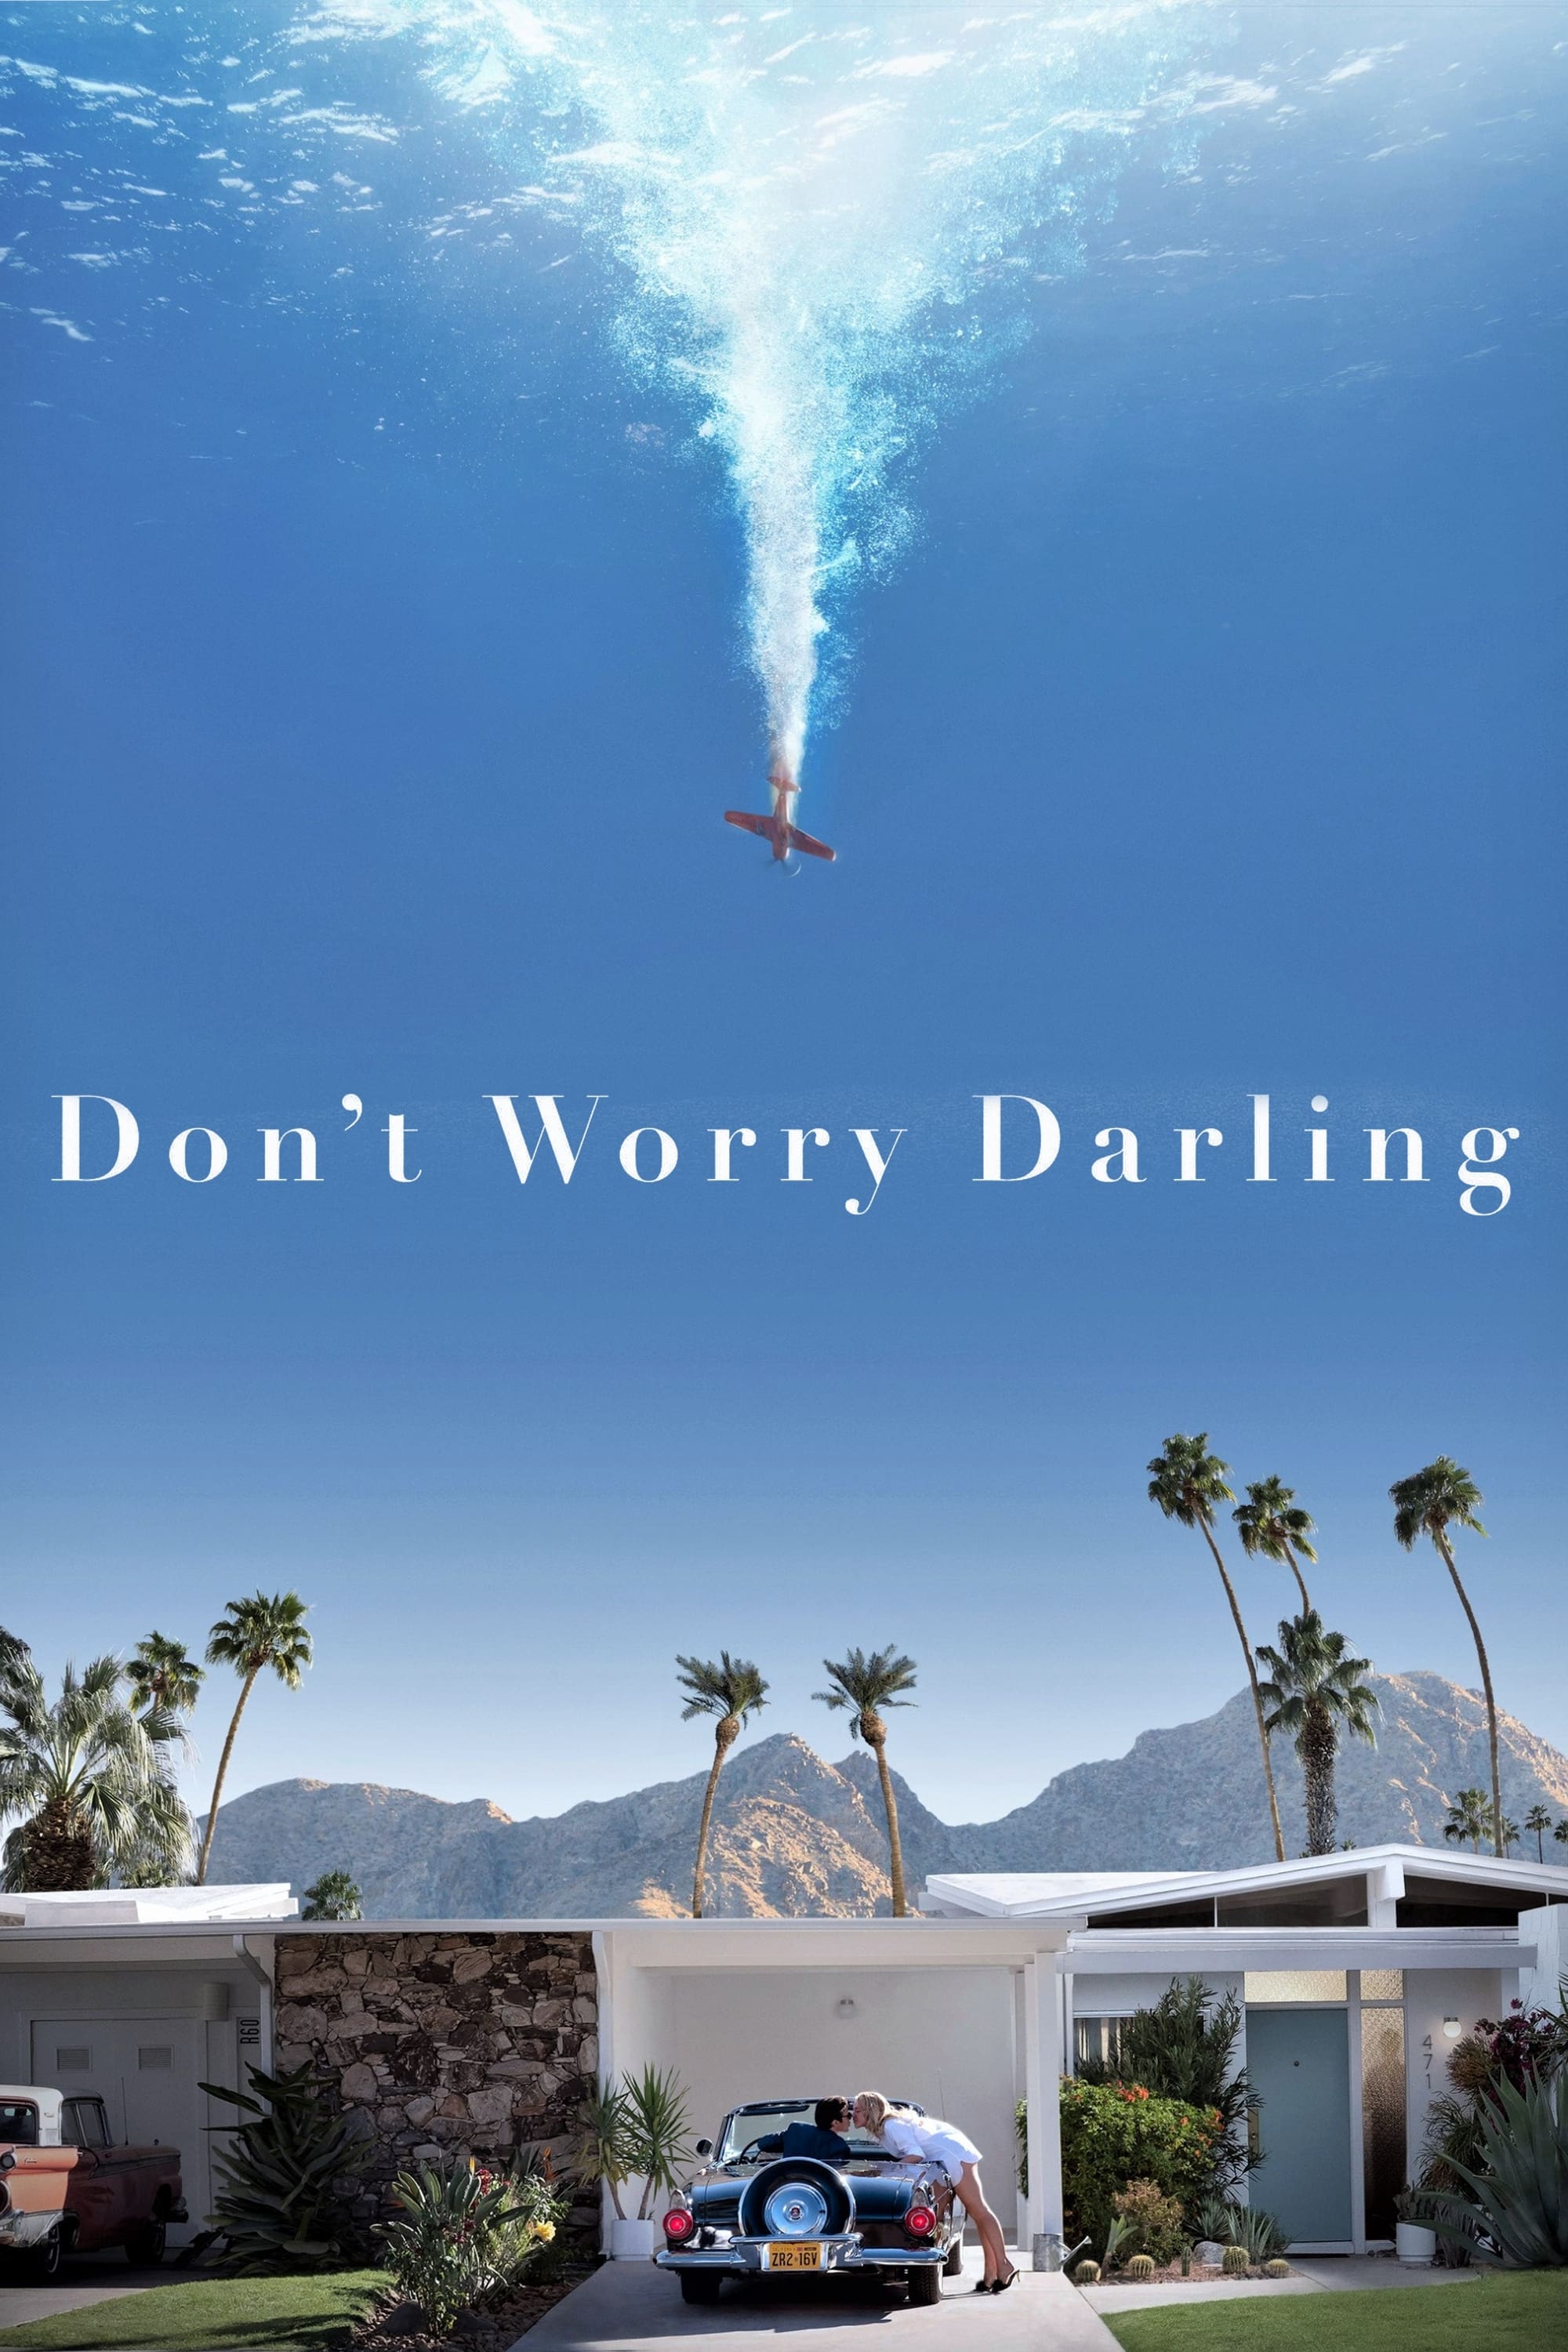 movie review don't worry darling